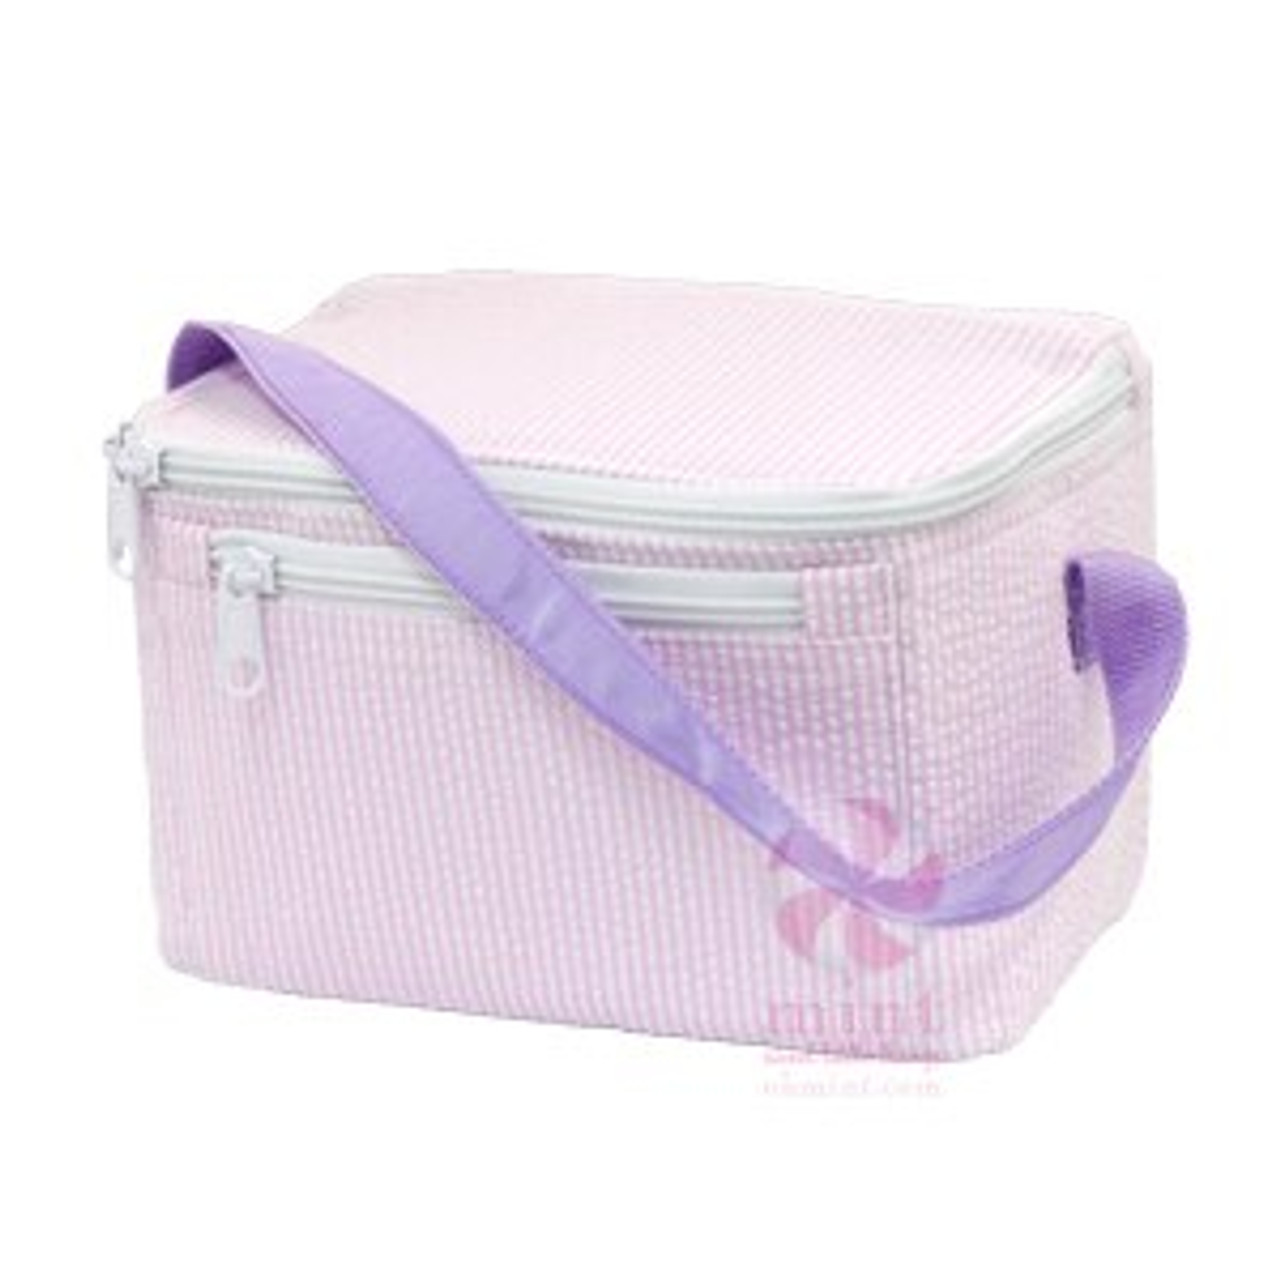 Lilac Square Lunch Bag